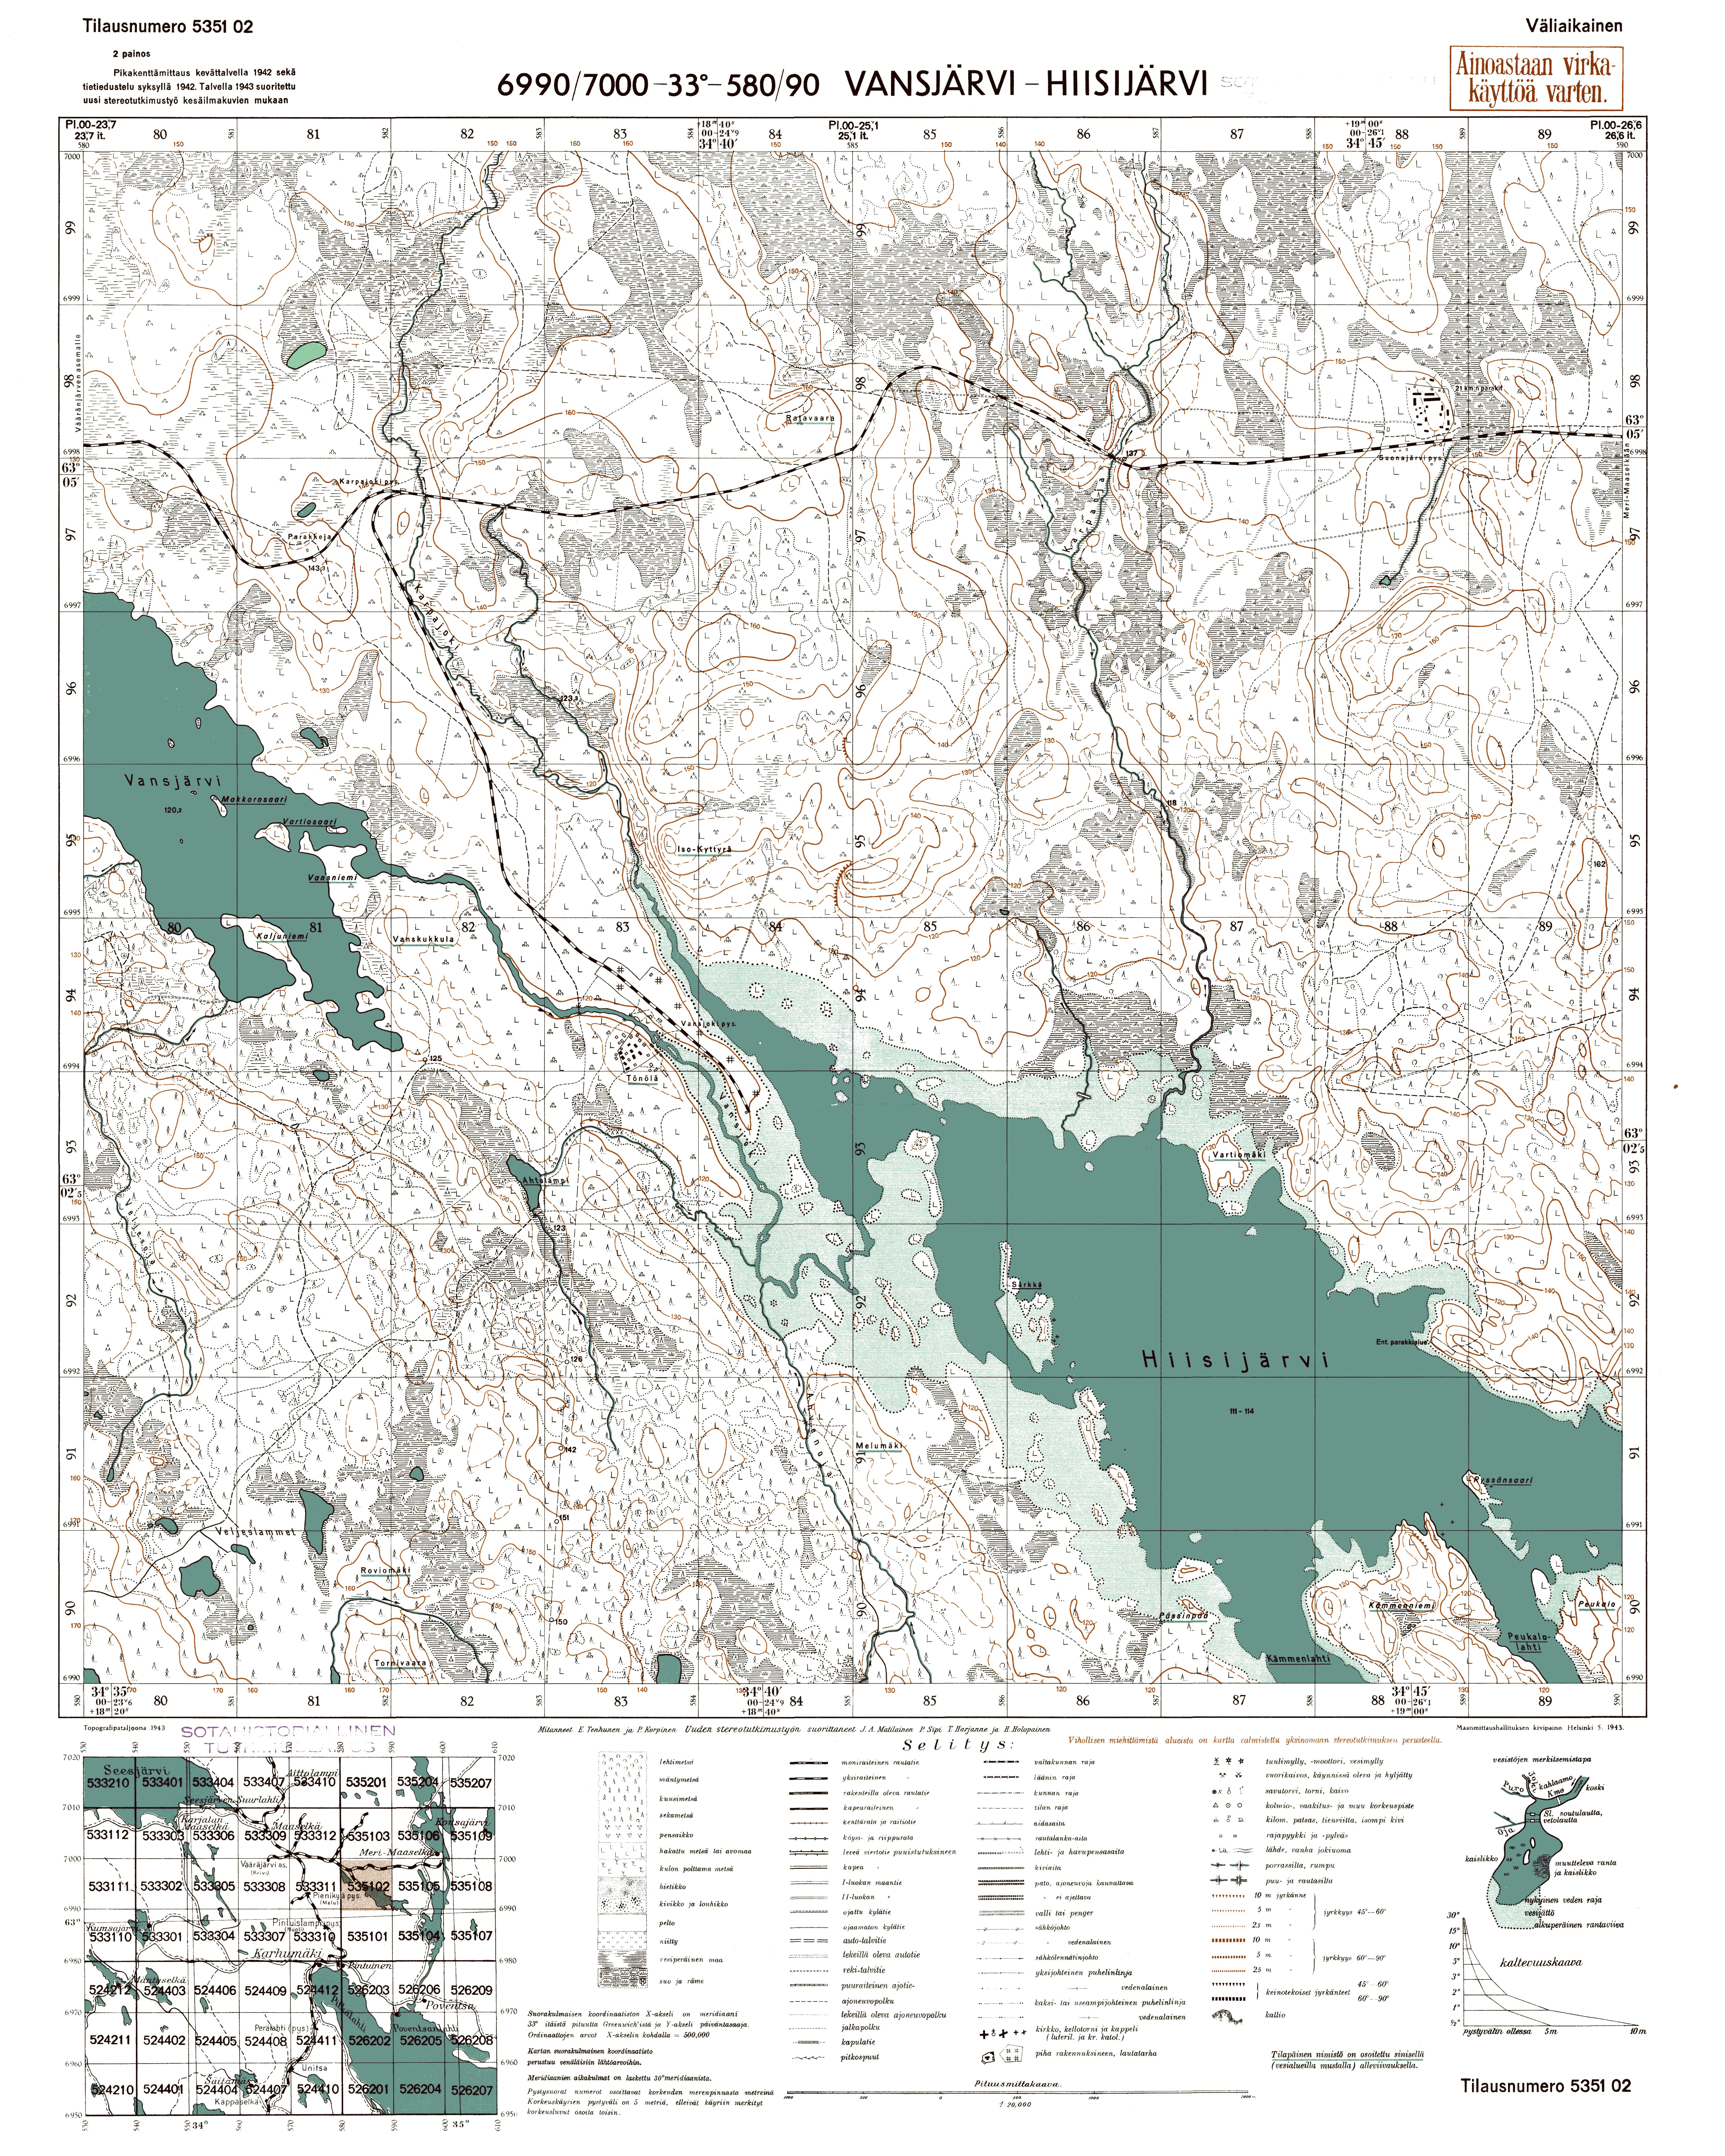 Vanžozero - Hižozero Lakes. Vansjärvi. Topografikartta 535102. Topographic map from 1943. Use the zooming tool to explore in higher level of detail. Obtain as a quality print or high resolution image